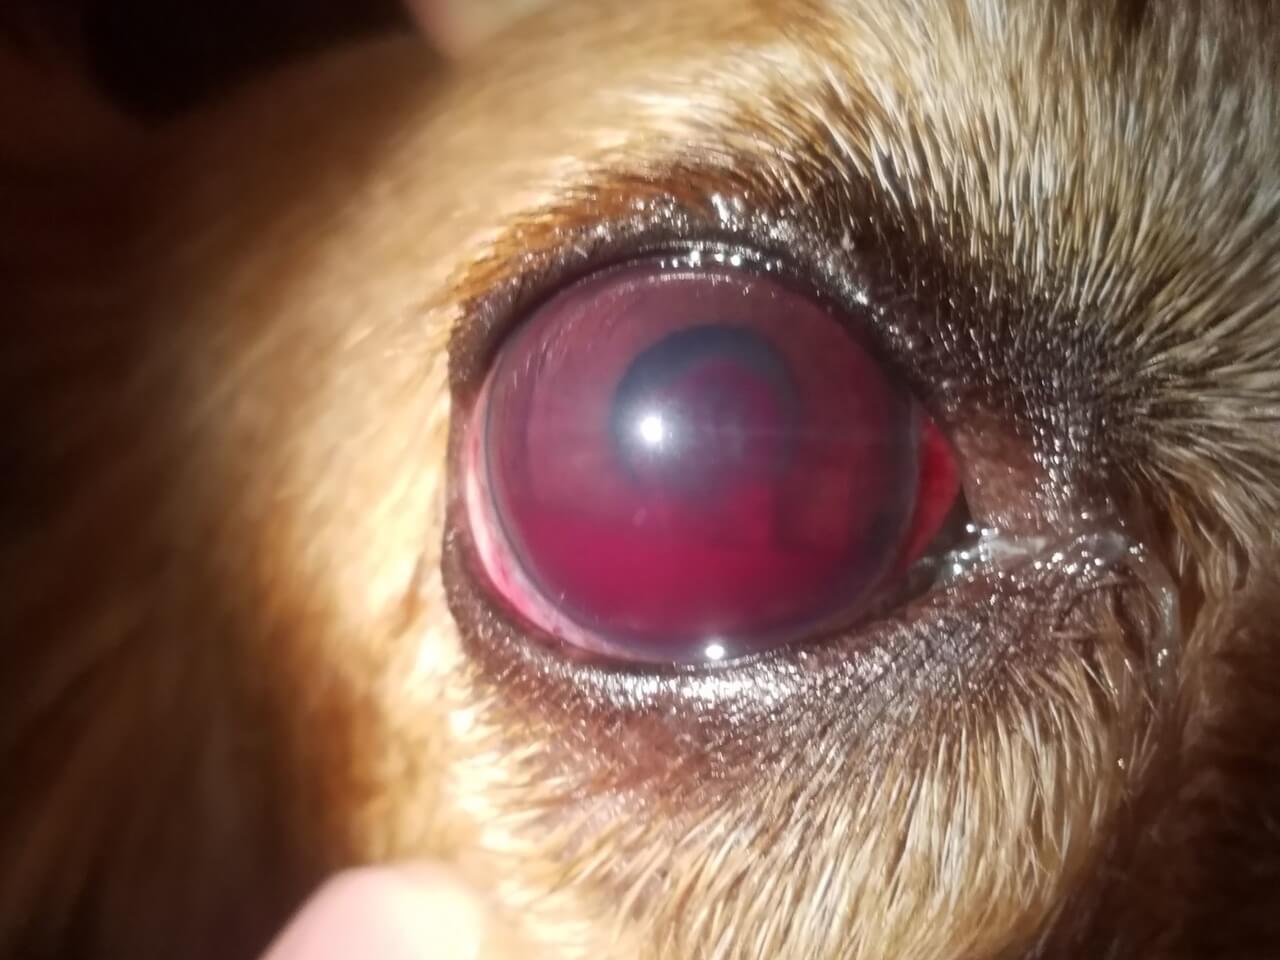 Hyphema in dogs.